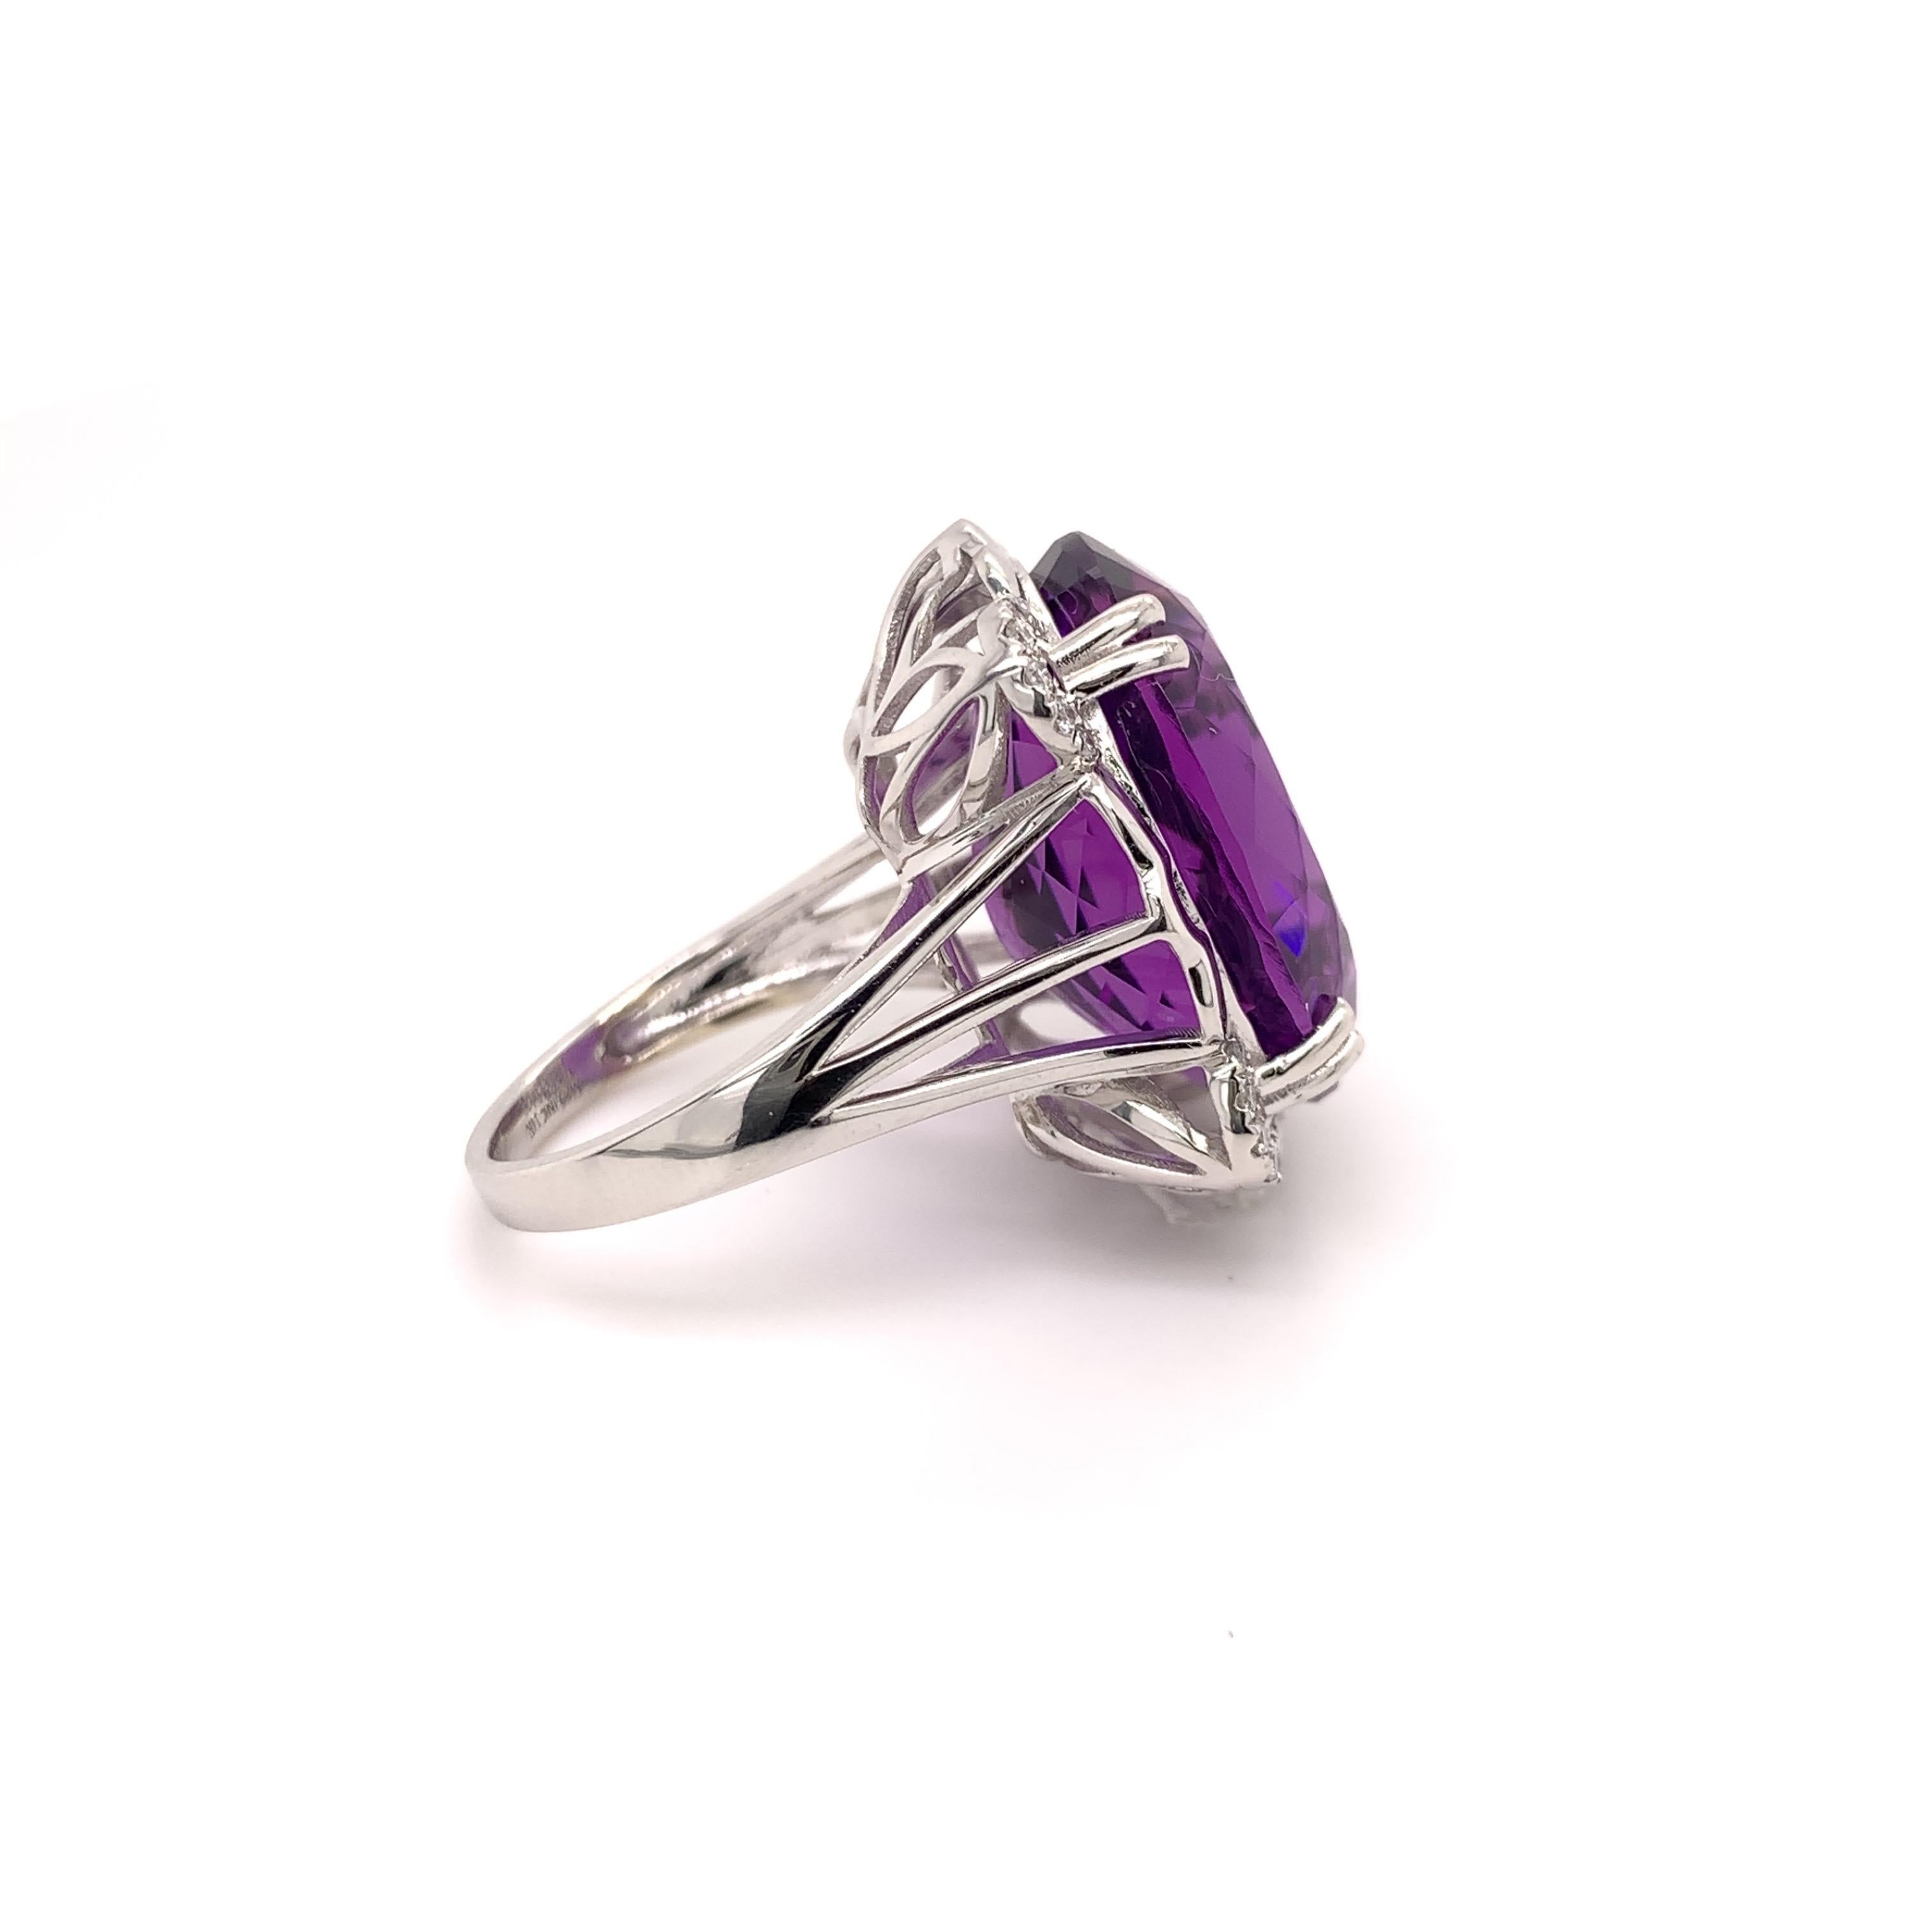 Contemporary 19.51 Carat Amethyst Cocktail Ring